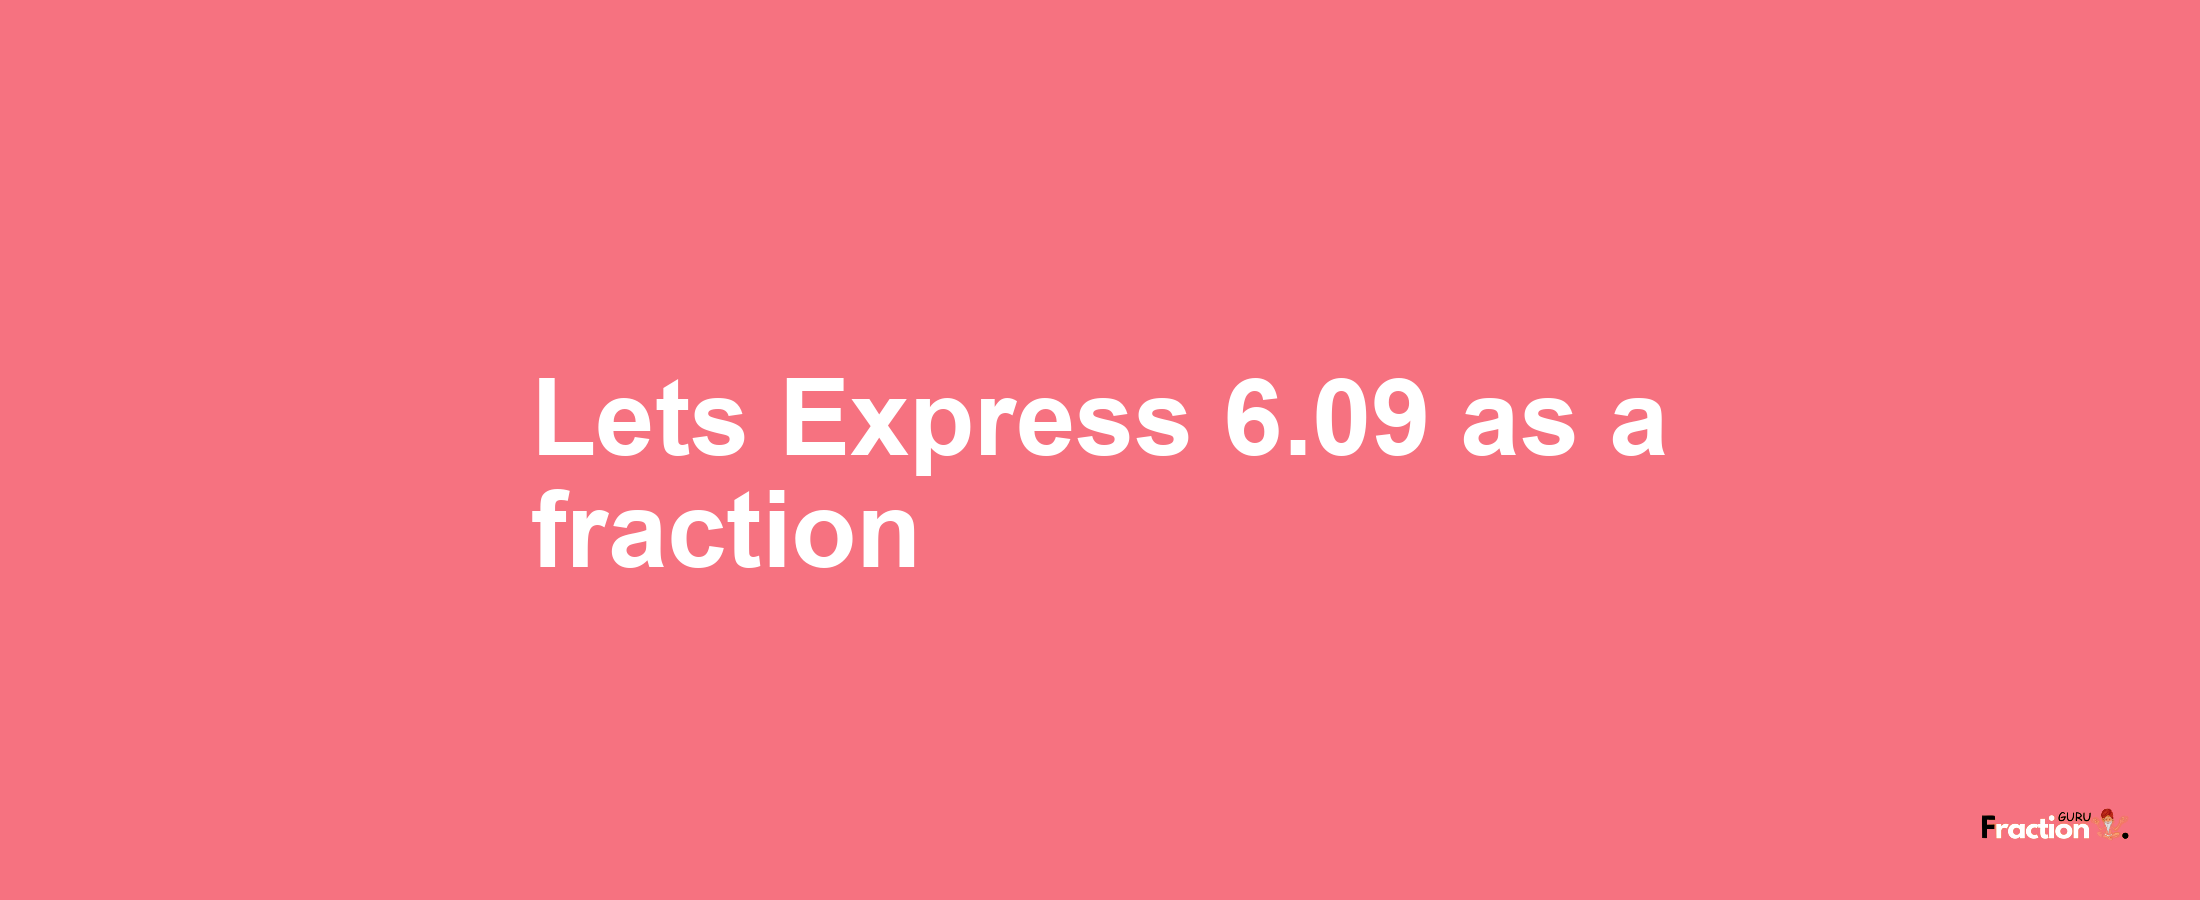 Lets Express 6.09 as afraction